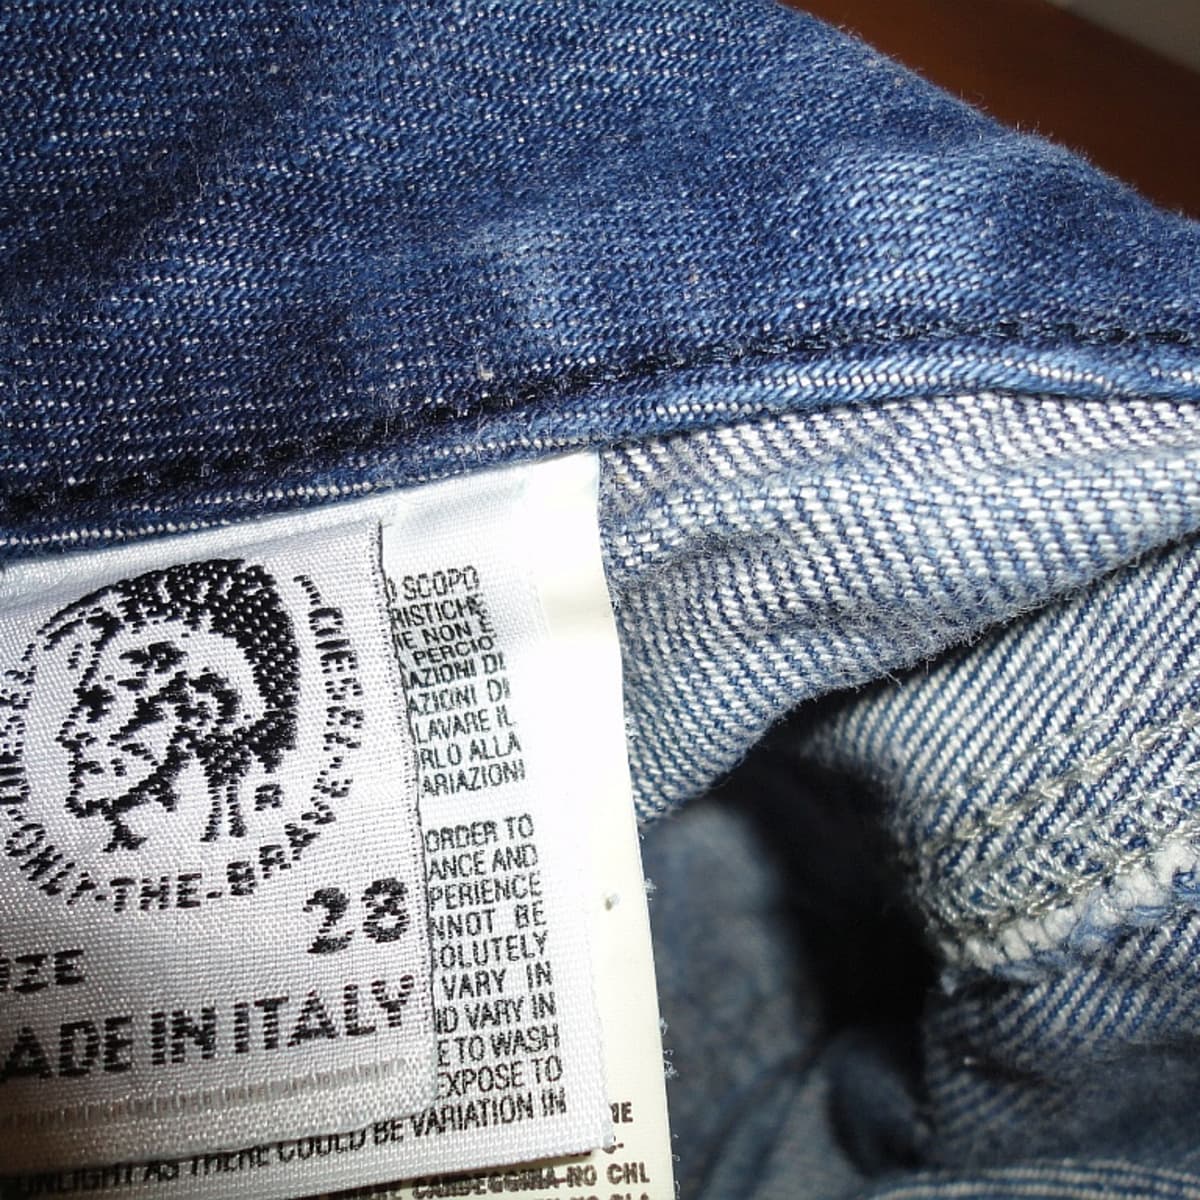 How to Authenticate Brand Label Jeans - Bellatory